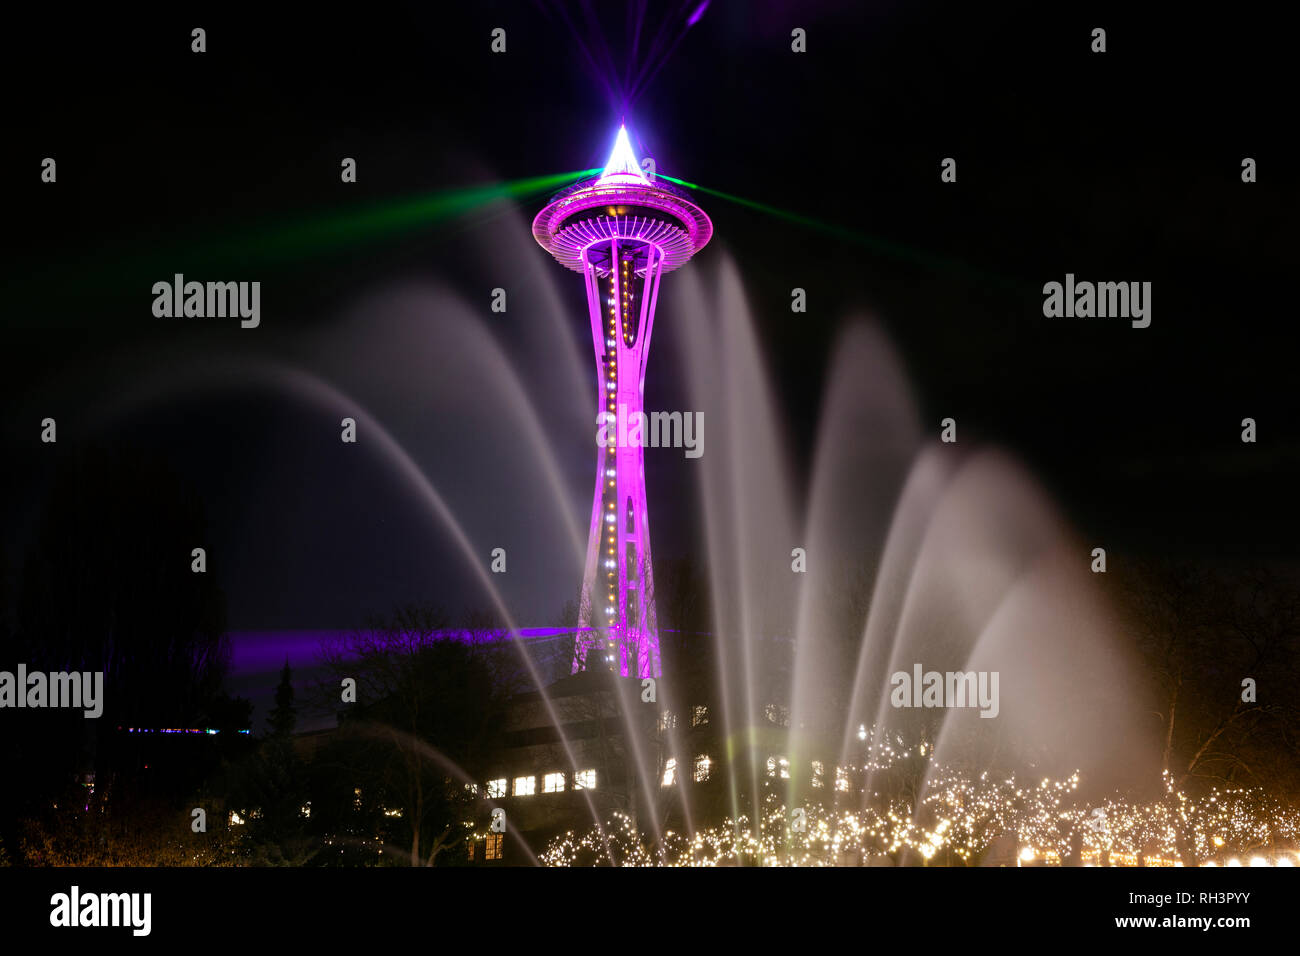 WA17066-00...WASHINGTON -  The Space Needle and the International Fountain in the Seattle Center on New Years Eve 2018. Stock Photo